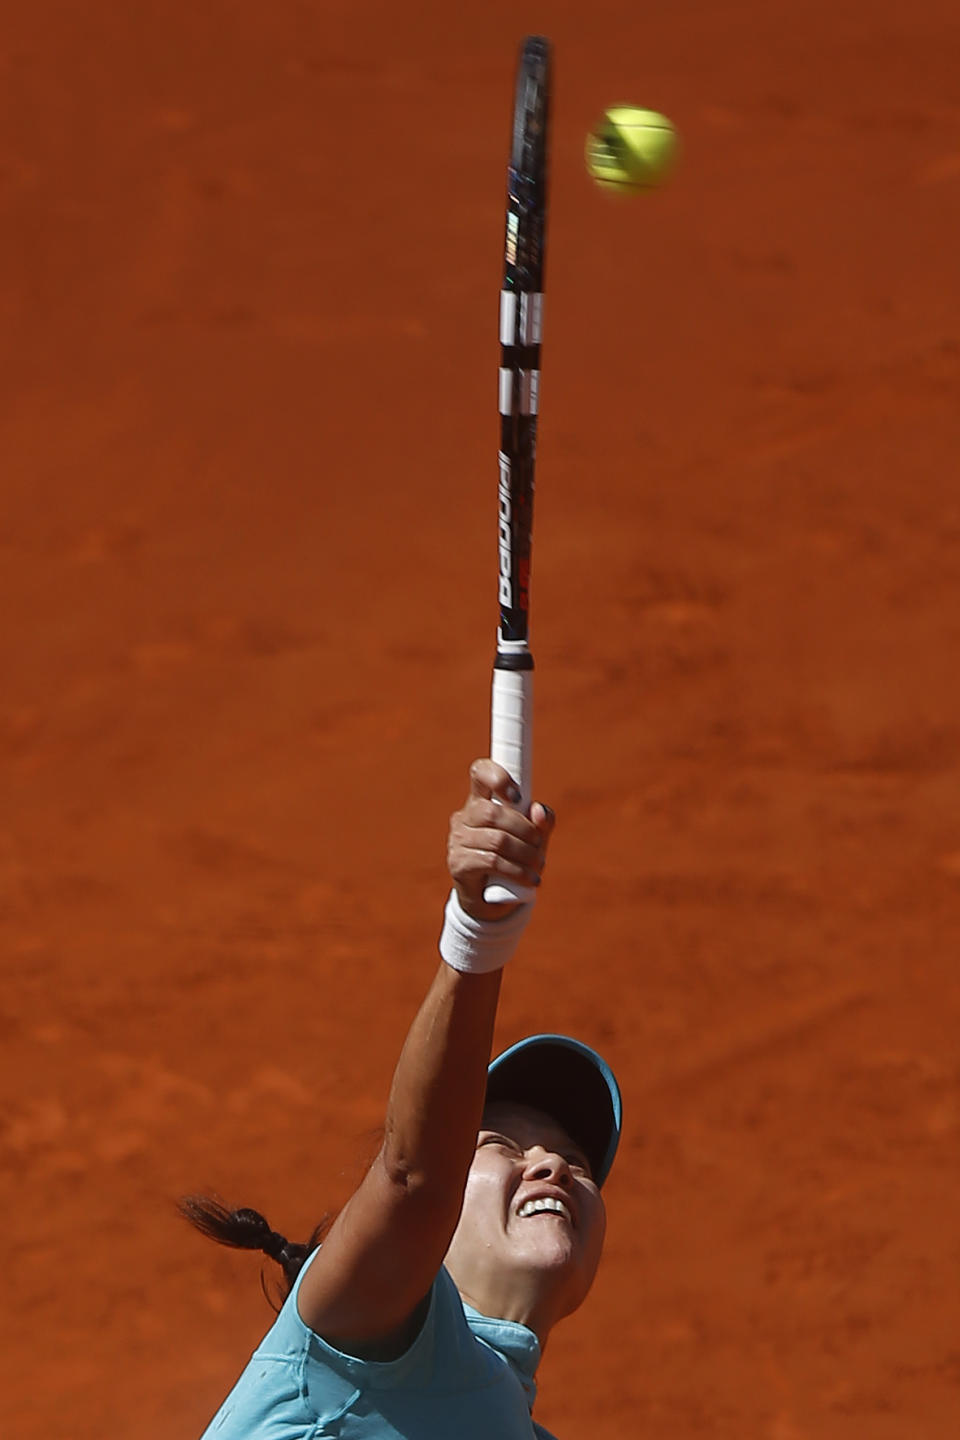 Li Na from China serves during a Madrid Open tennis tournament match against Jie Zheng from China, in Madrid, Spain, Tuesday, May 6, 2014. (AP Photo/Andres Kudacki)